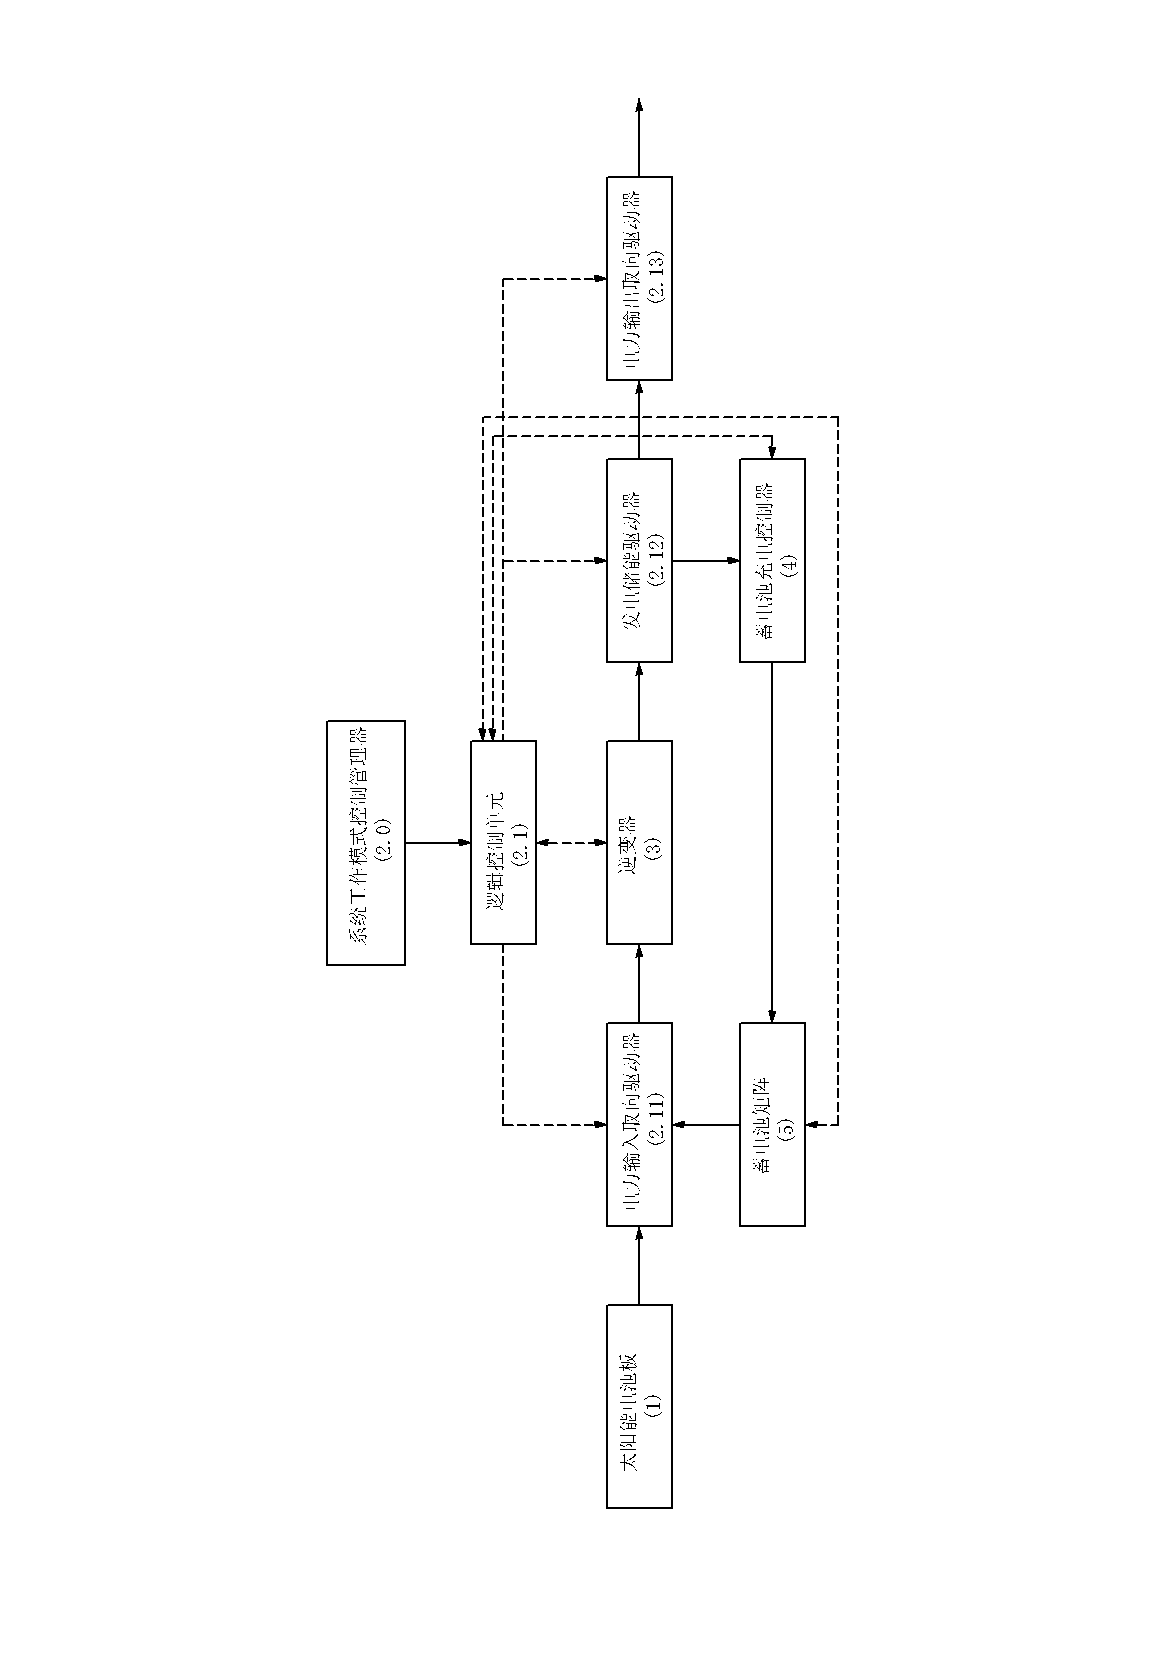 Novel off-grid/grid-connected integrated solar power generation system and control method